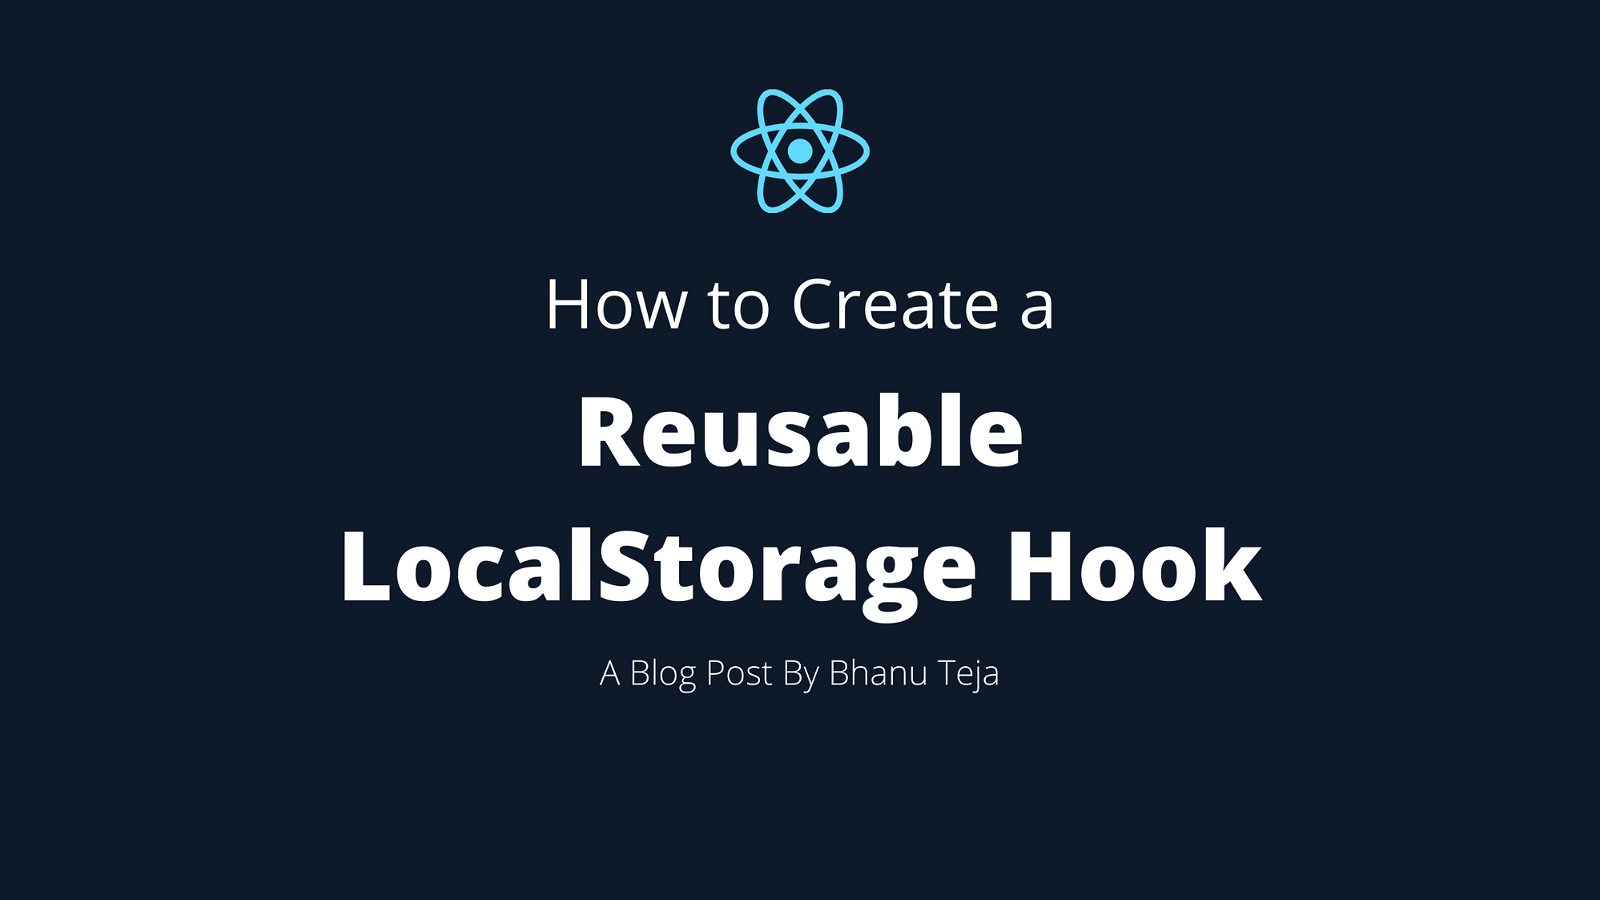 How to Create a Reusable LocalStorage Hook